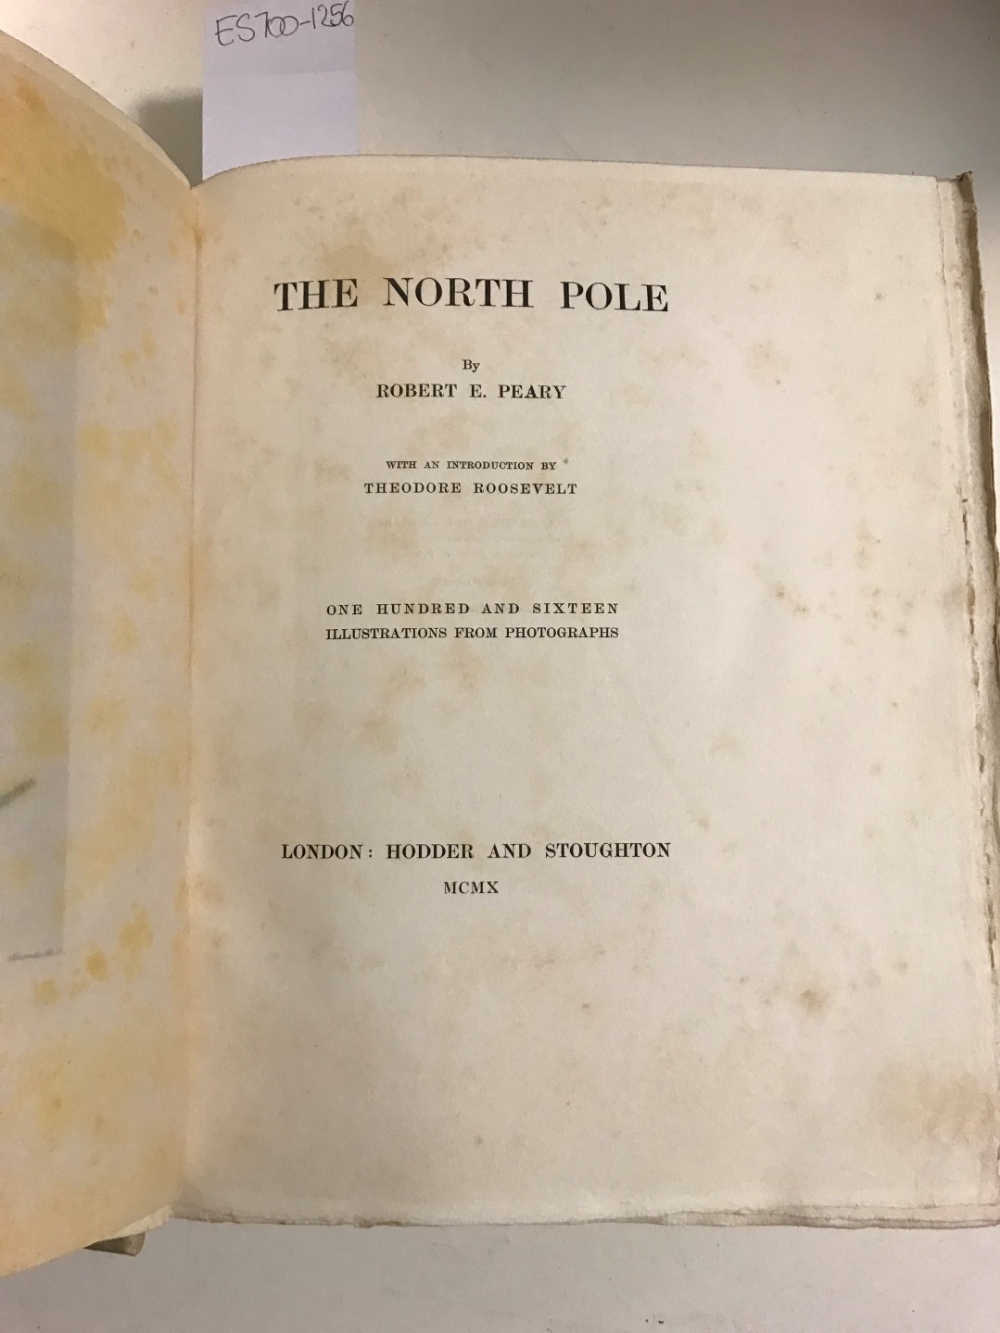 PEARY (Robert E.), The North Pole, London: Hodder and Stoughton, 1910, 1st edition, 4to, Edition - Image 3 of 7